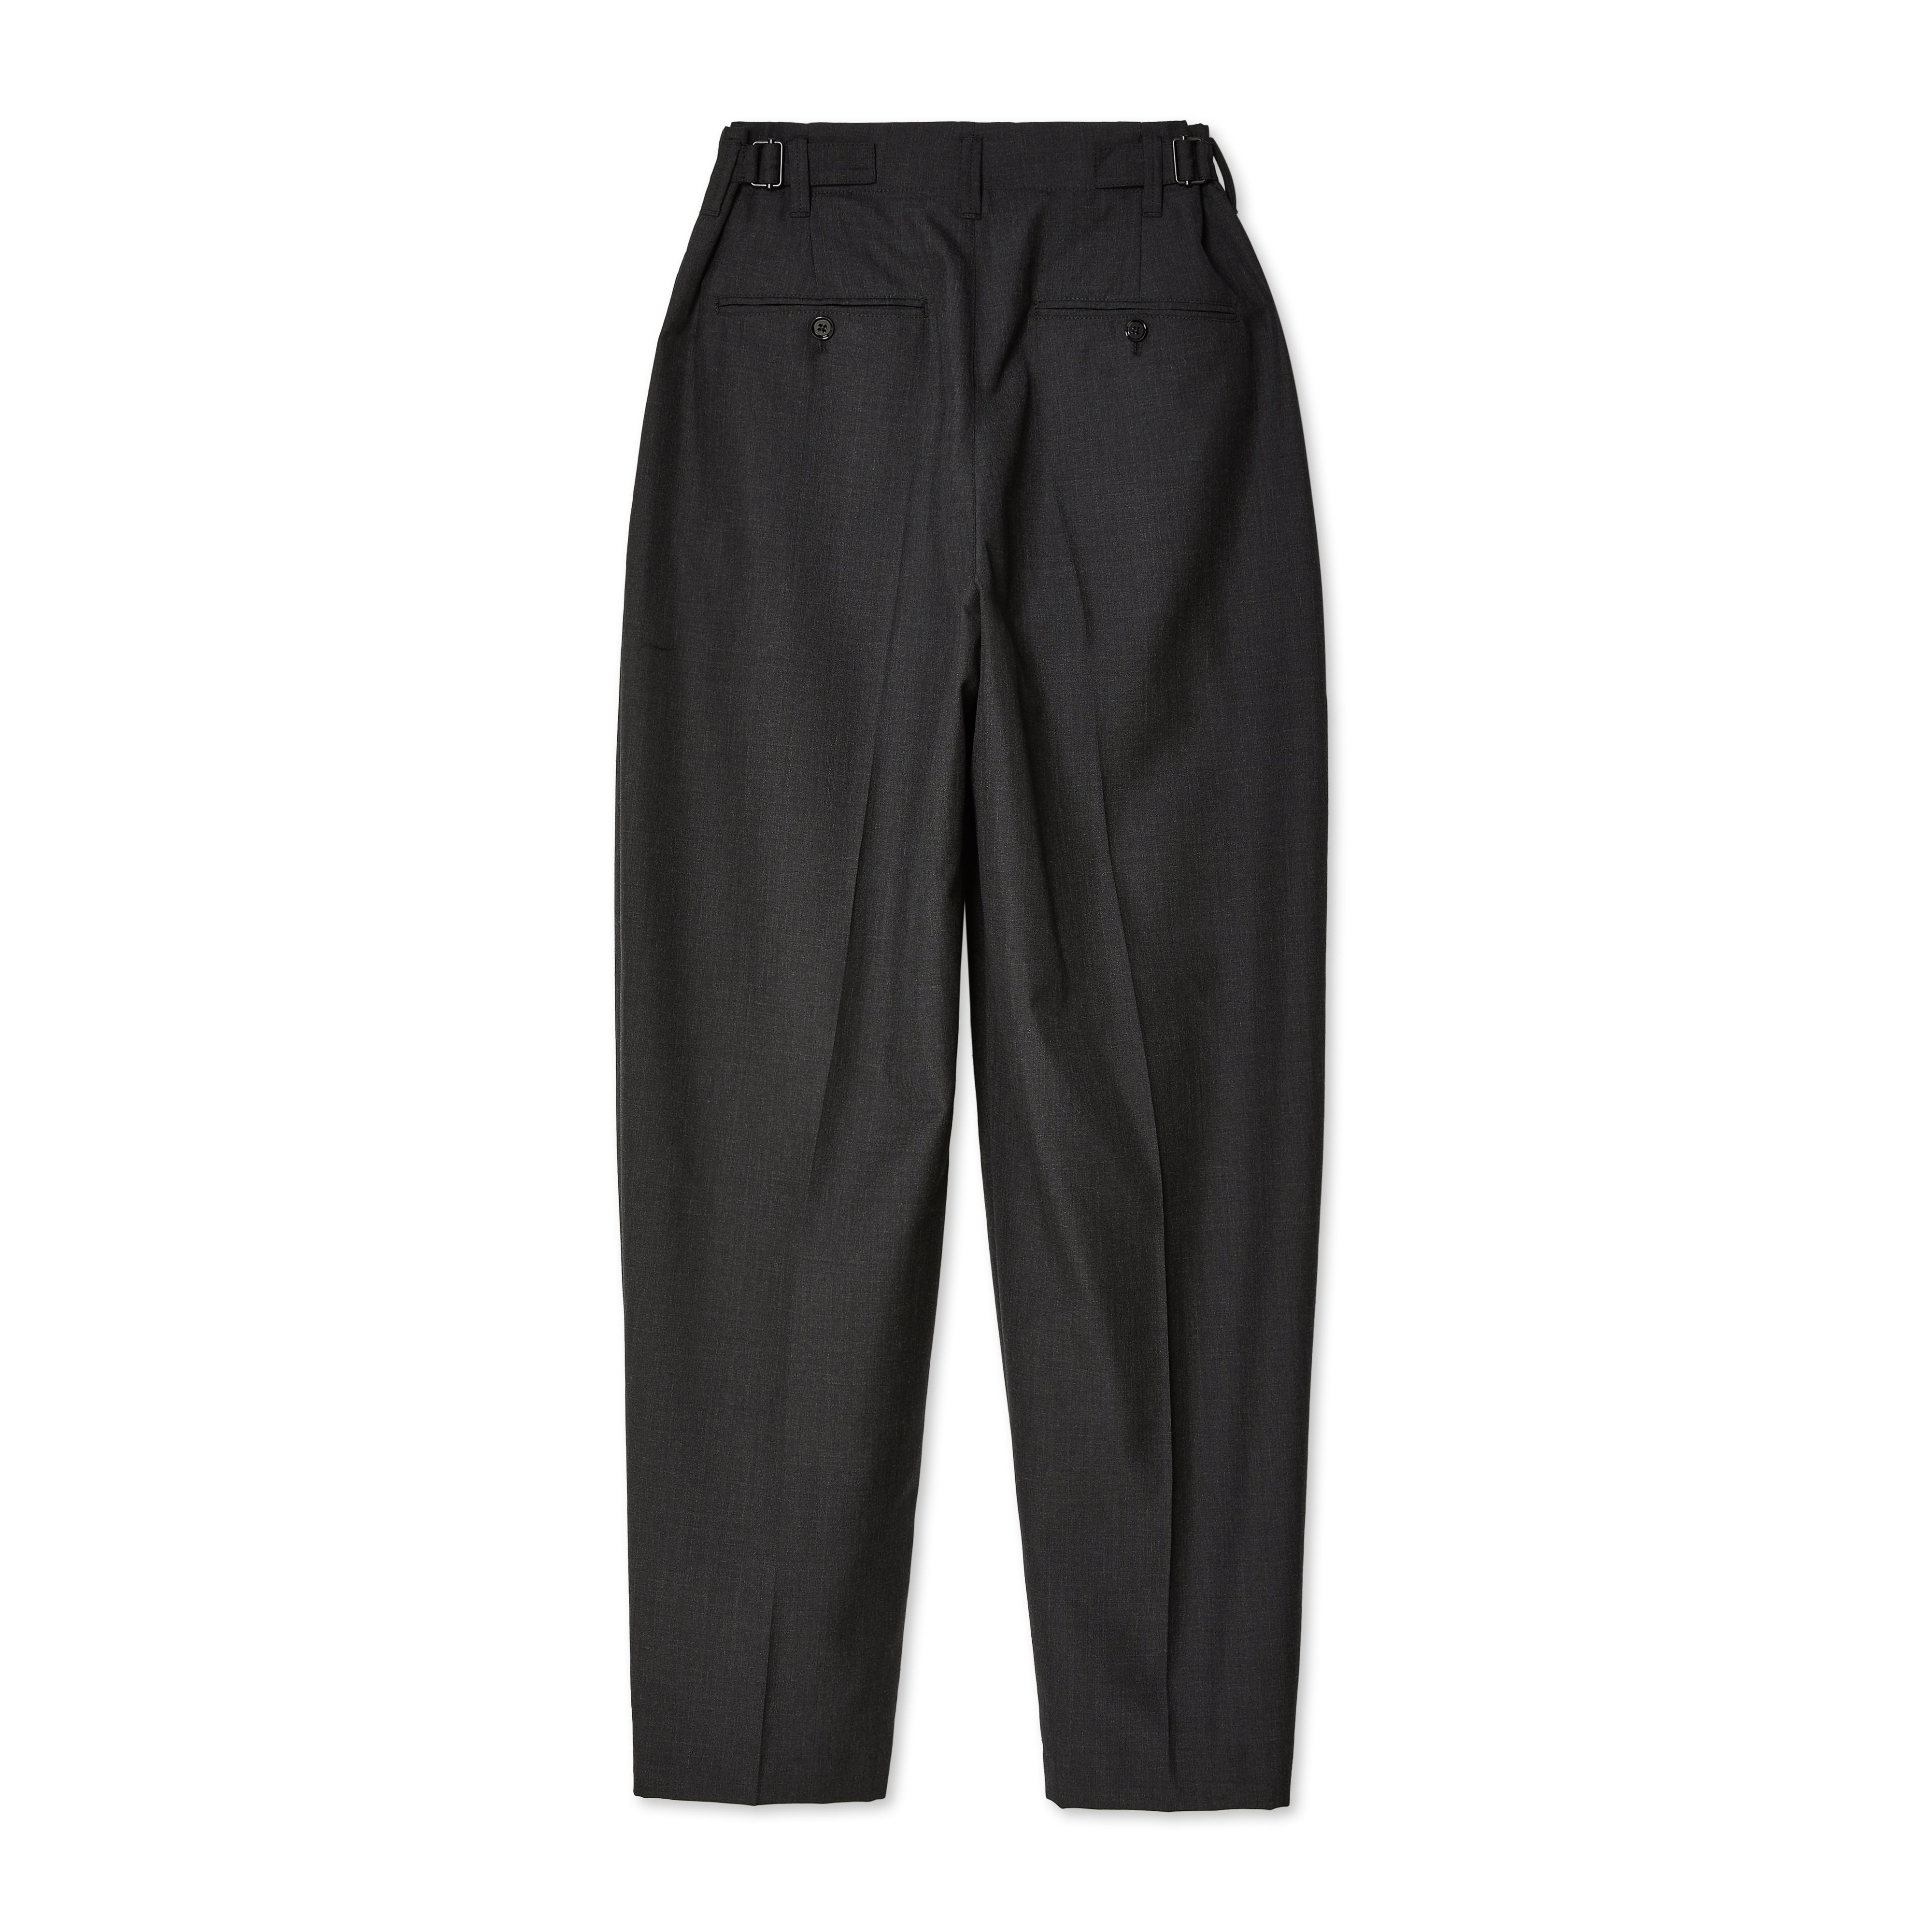 Lemaire - Women’s Pleated Tapered Pants - (Caviar)